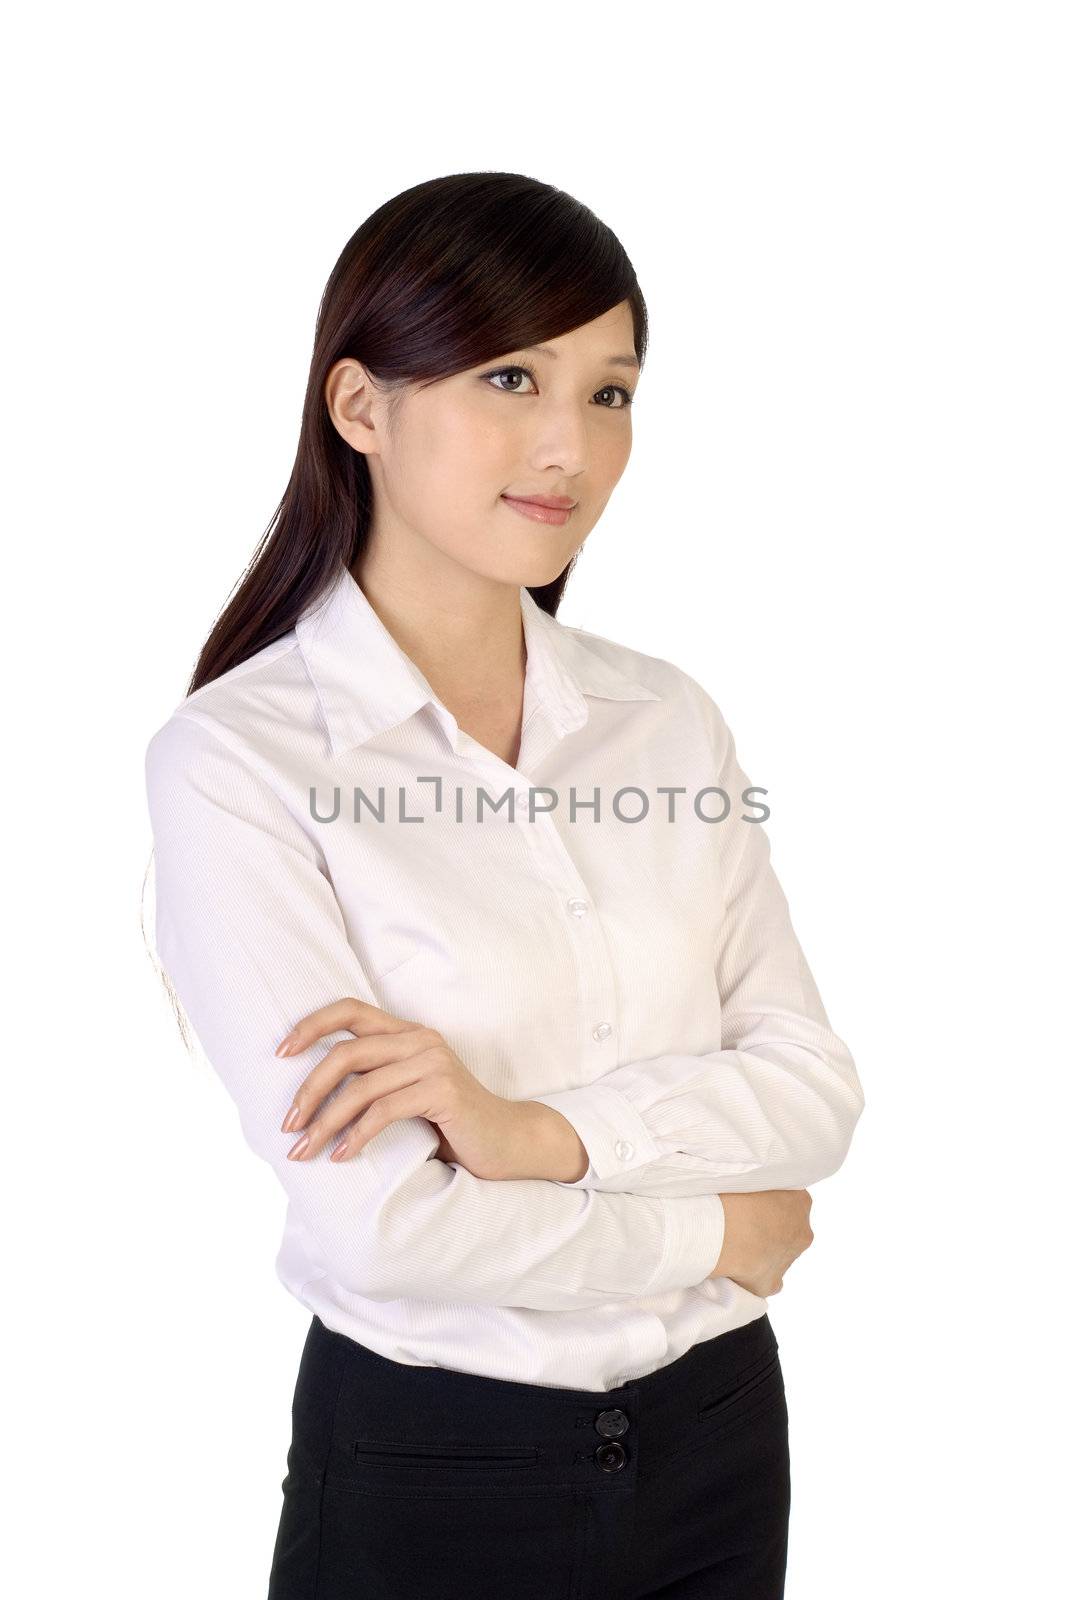 Confident business woman portrait of Asian in white background.